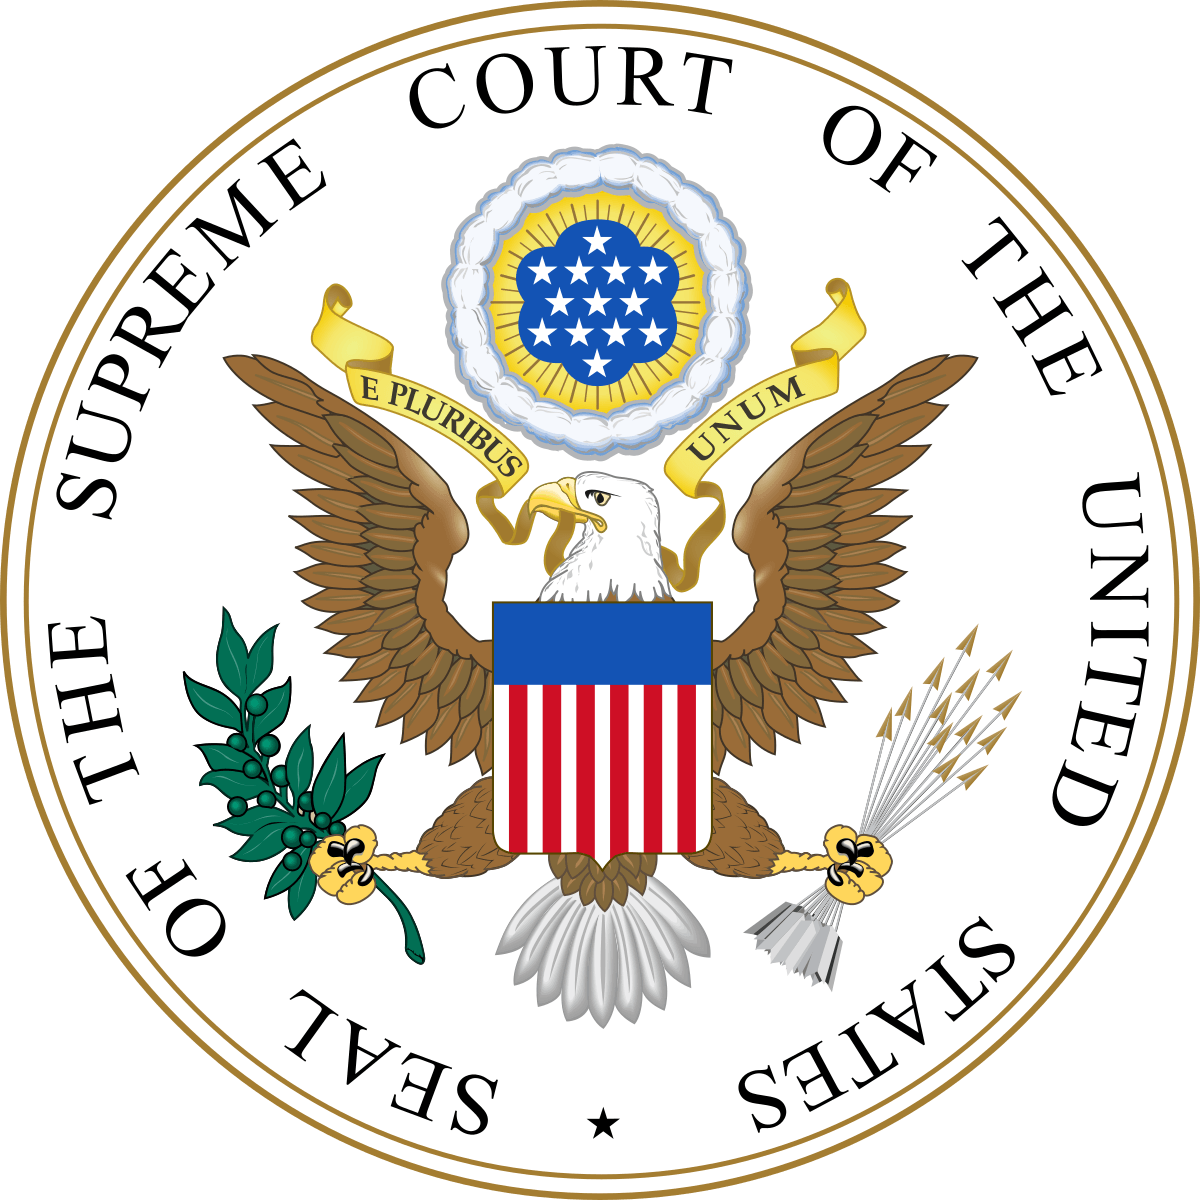 Supreme Court Offical Logo - List of Justices of the Supreme Court of the United States